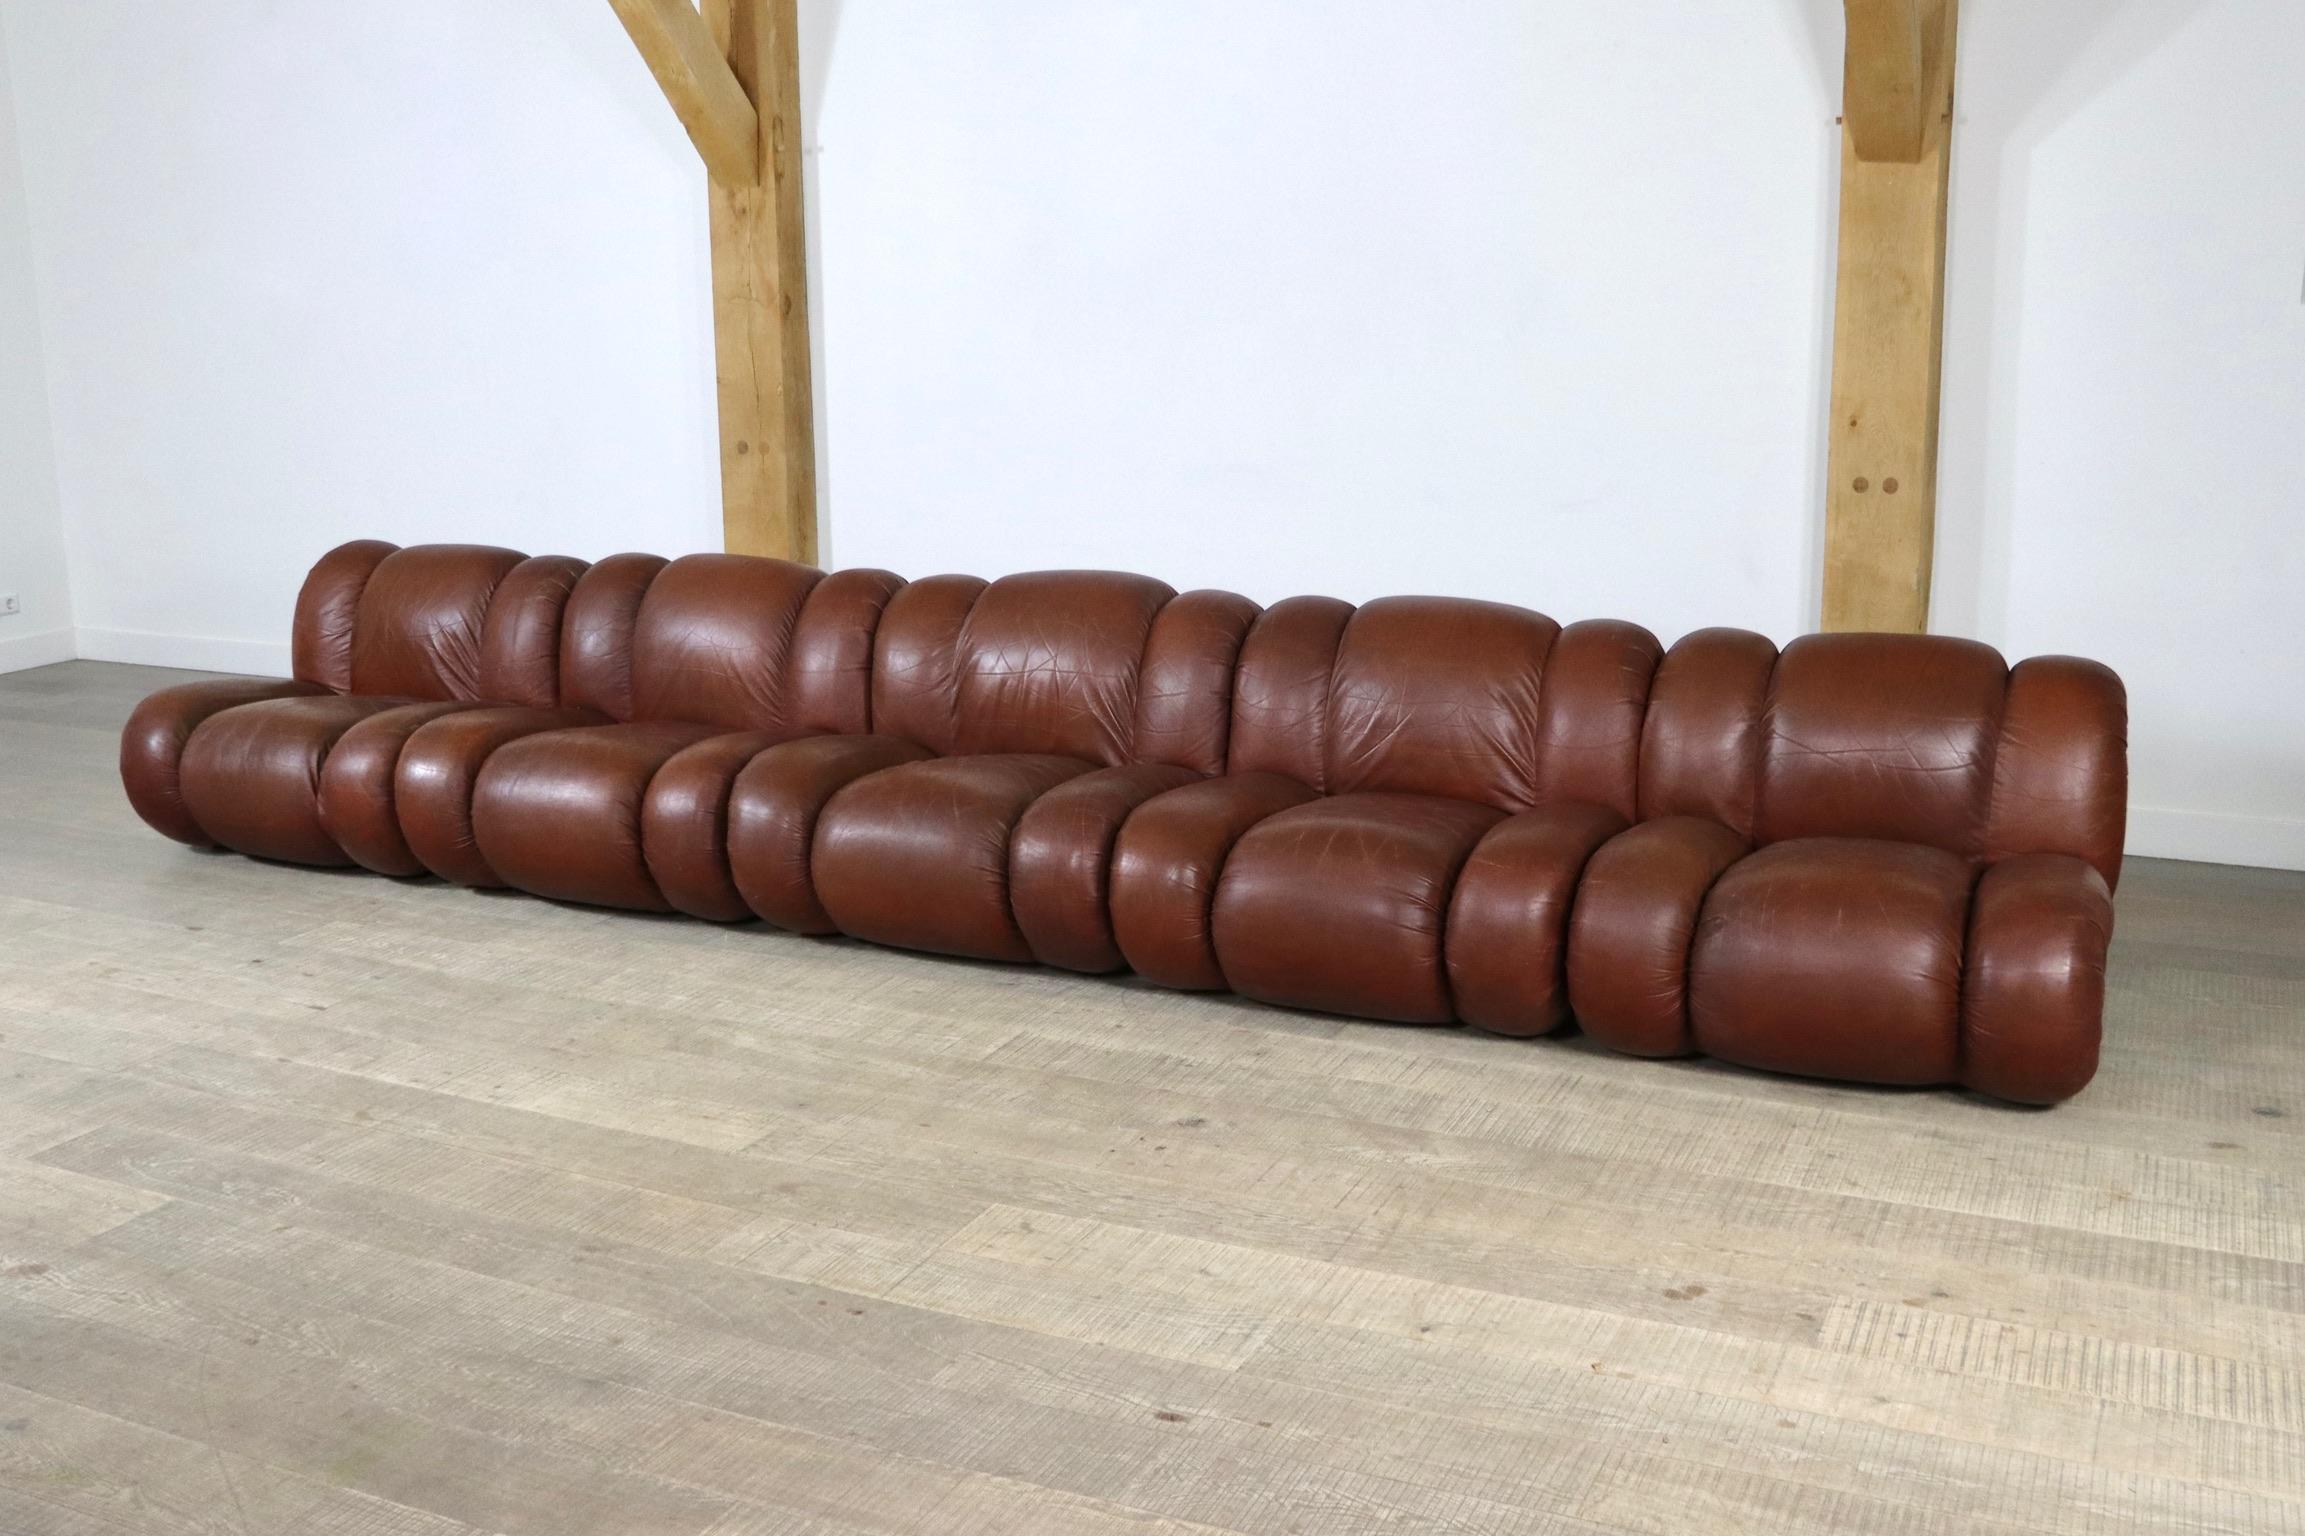 Very rare and beautiful brown leather and chrome Velasquez modular sofa by Mimo Padova, Italy 1970s. Outstanding comfort meets design in this chunky modular sofa. The sofa is designed that when you sit in it, you sink into the sofa seating, allowing